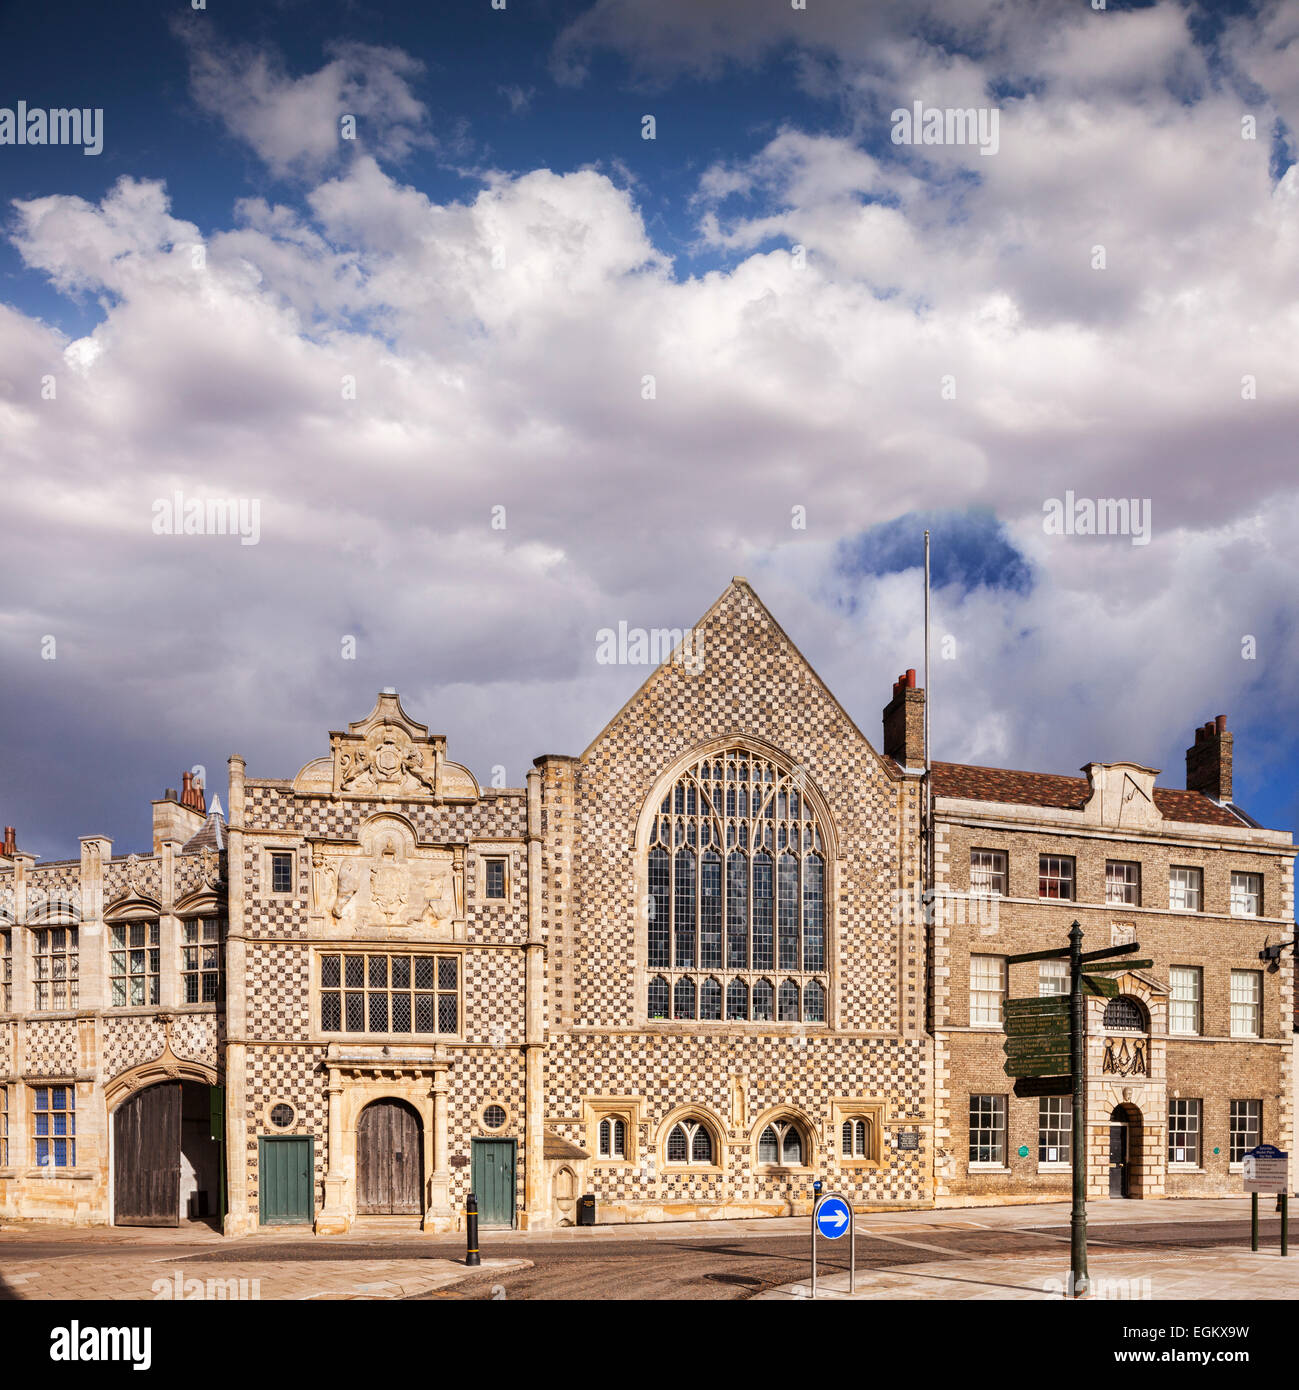 The Town Hall and Trinity Guildhall, Kings Lynn, Norfolk, England, UK. Stock Photo